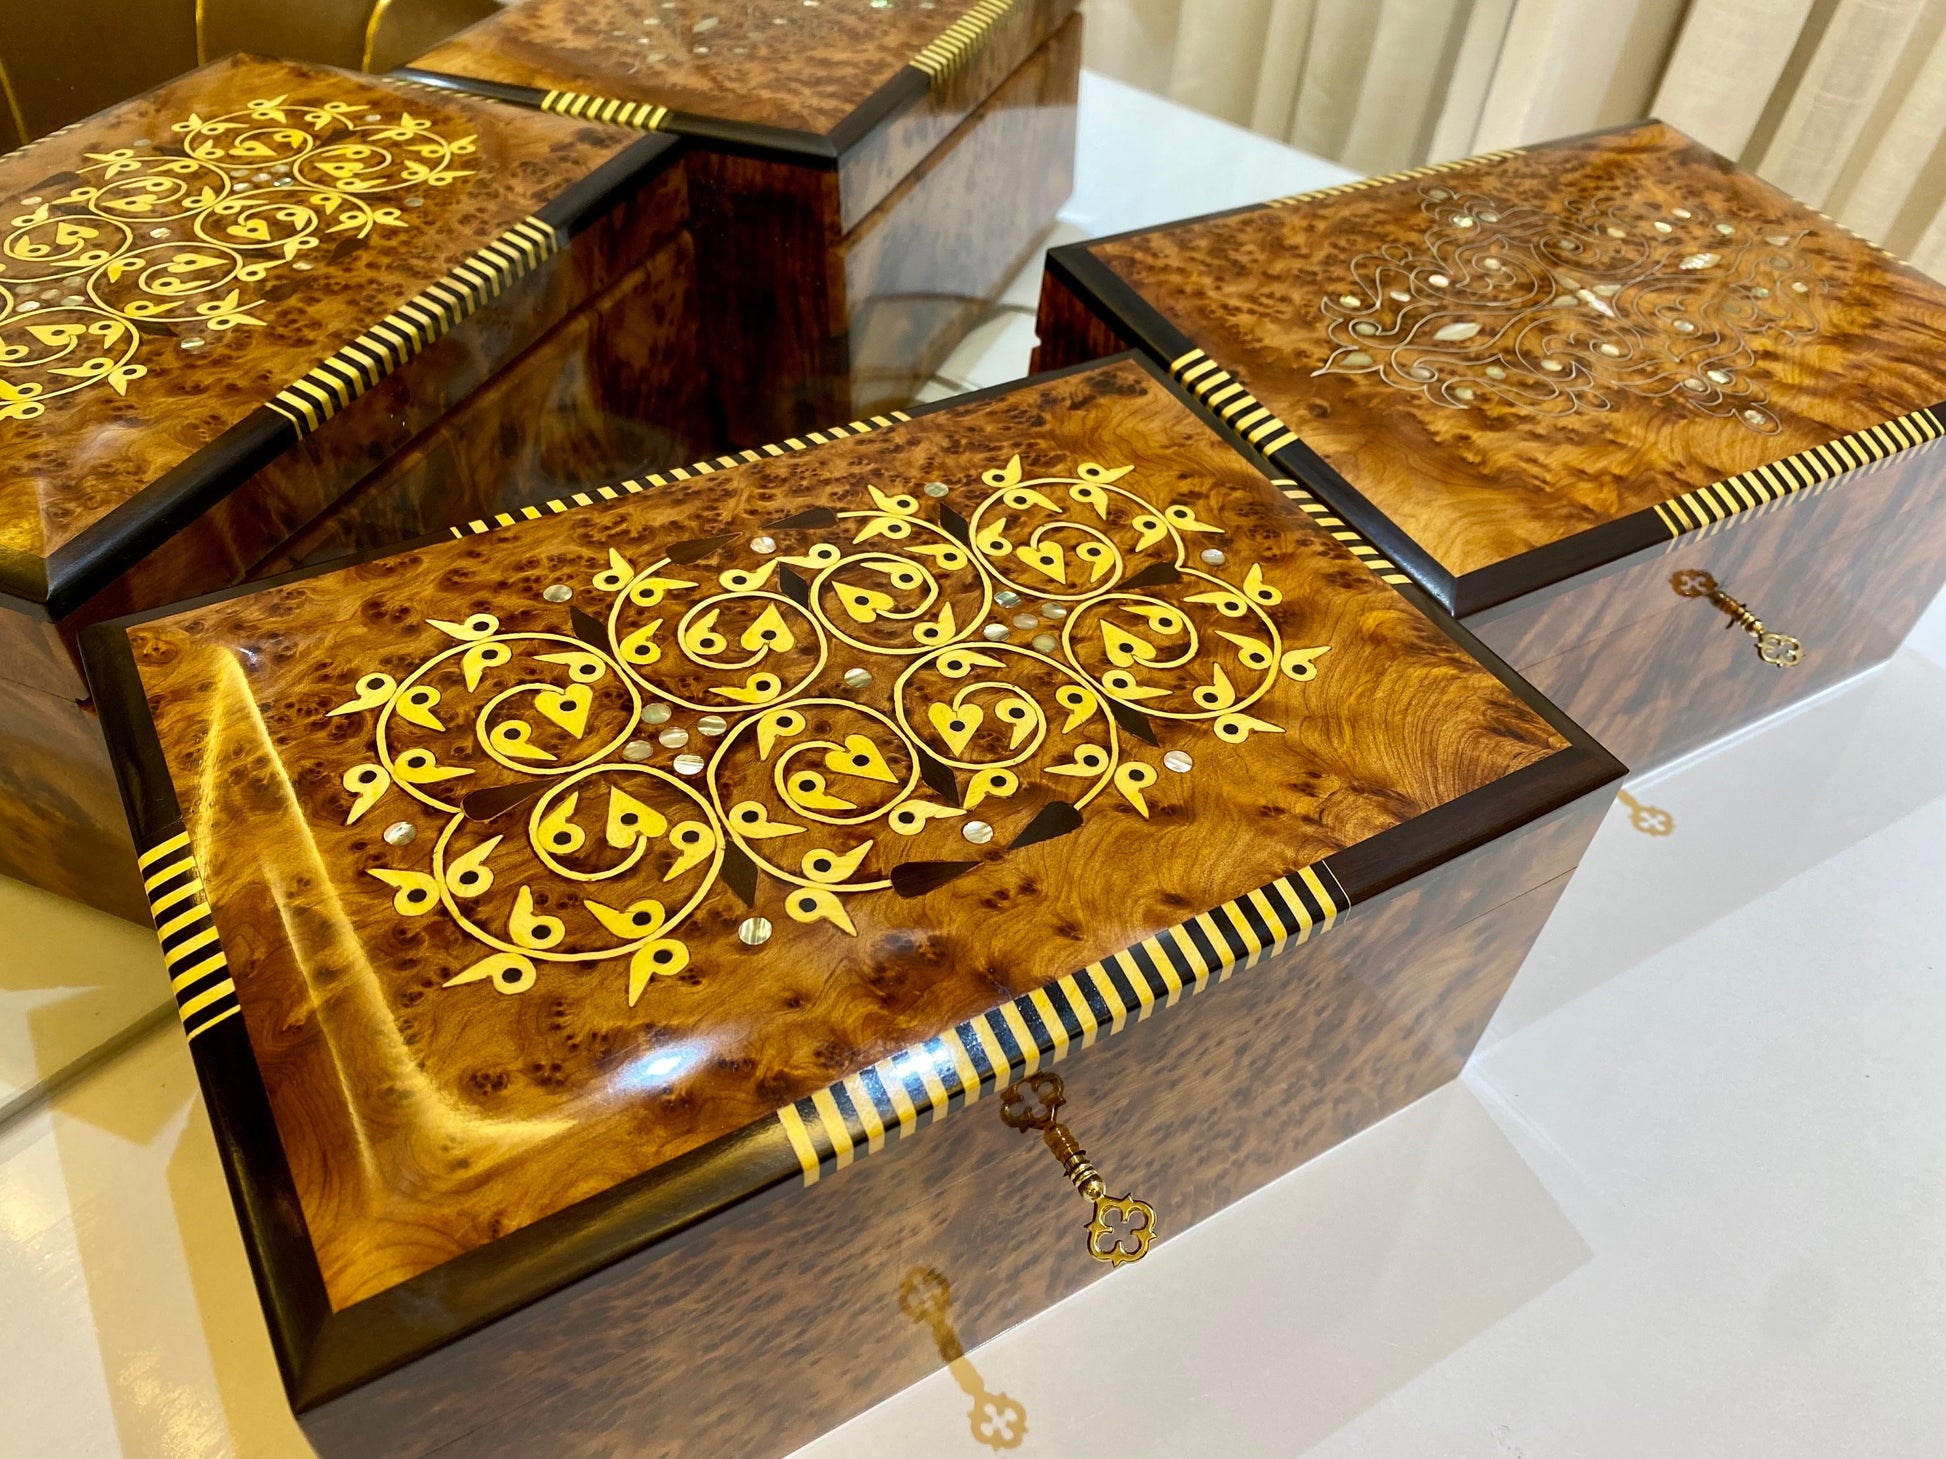 Set of 2 Handcrafted Moroccan jewelry Box,wood engraved with mother of pearls,lemon wood,brass inlay,lockable thuya wooden Box with key